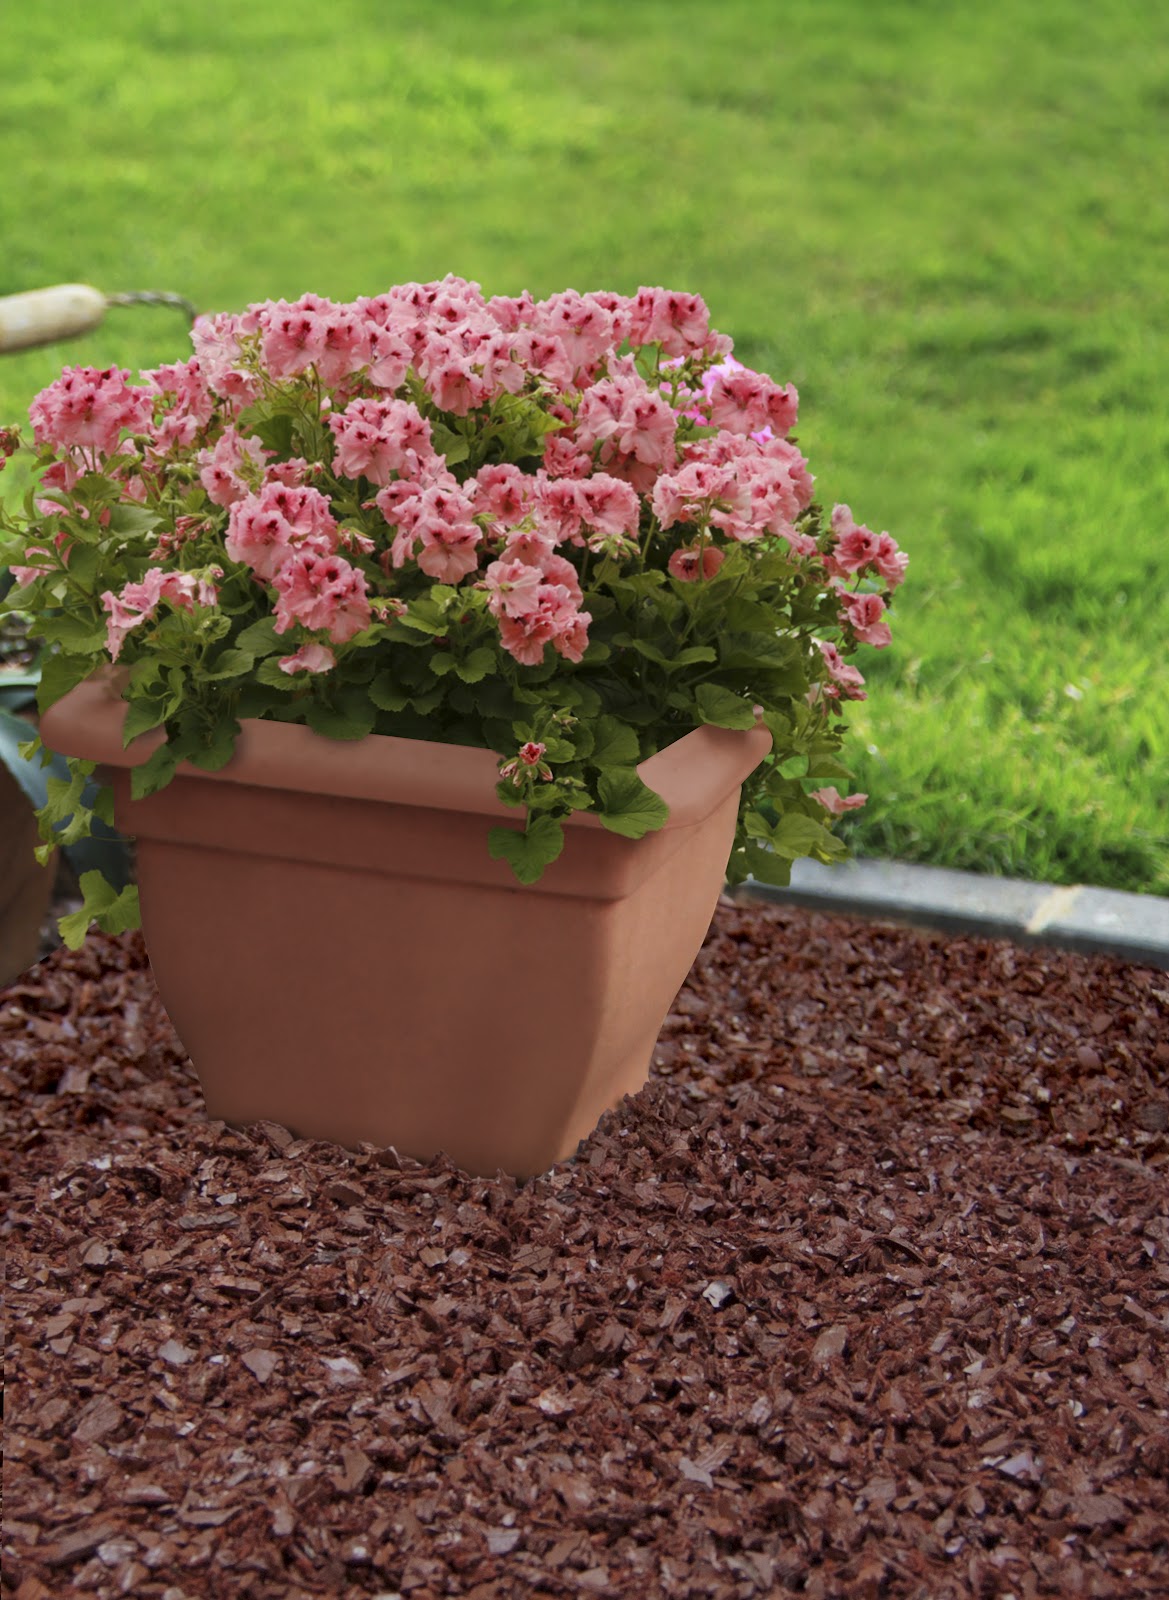 how to apply mulch garden flowers compost leaves grass clippings